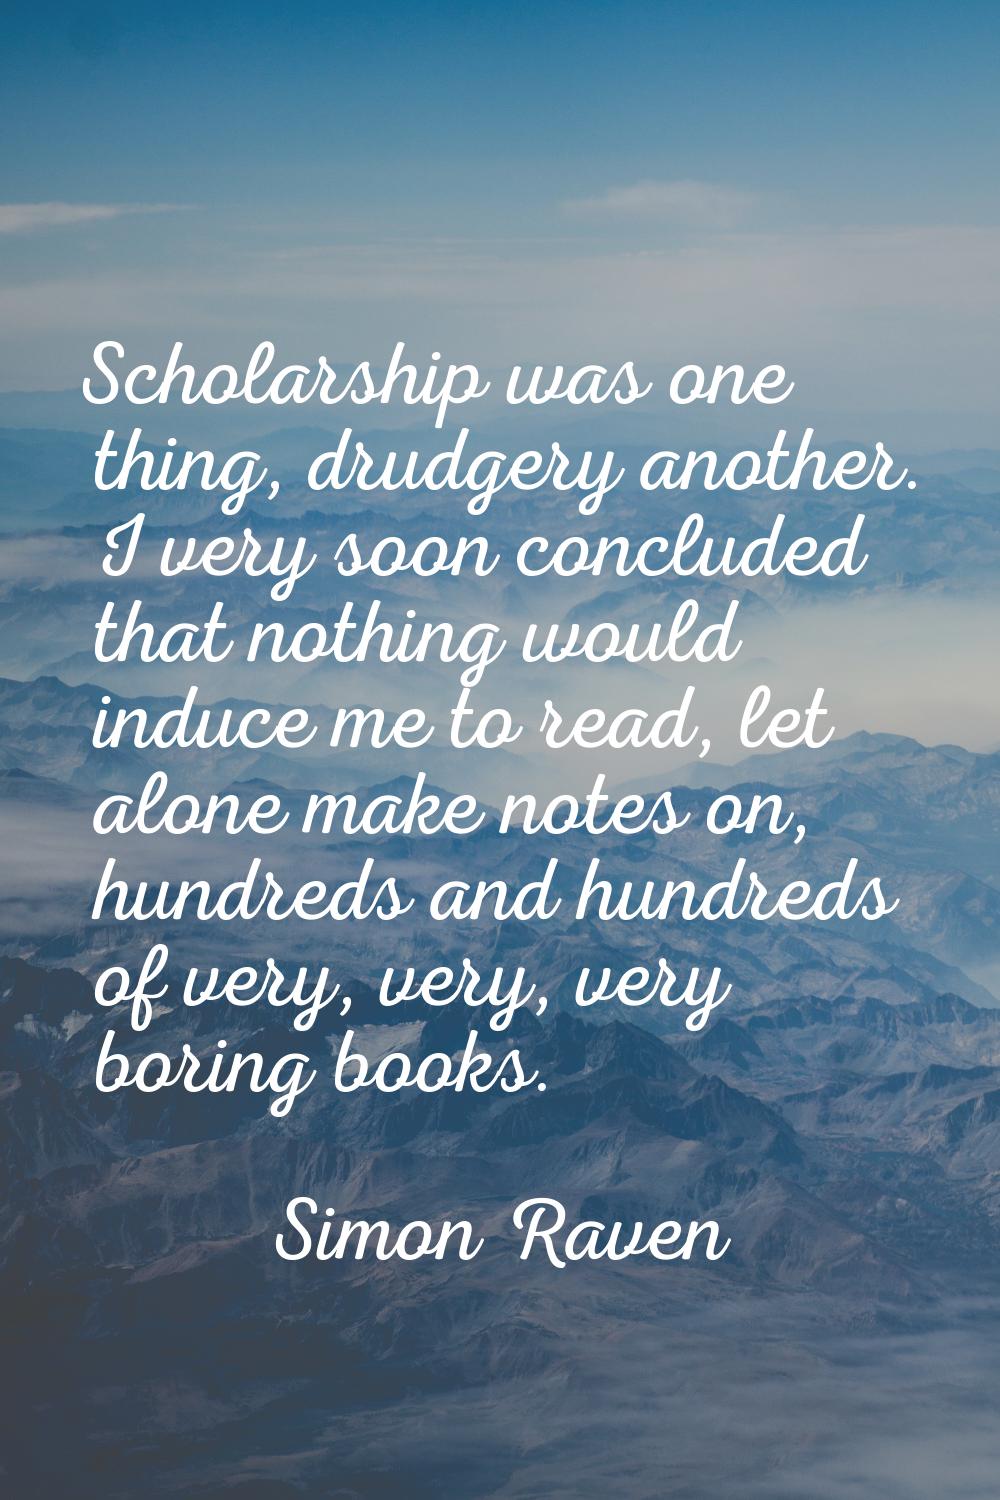 Scholarship was one thing, drudgery another. I very soon concluded that nothing would induce me to 